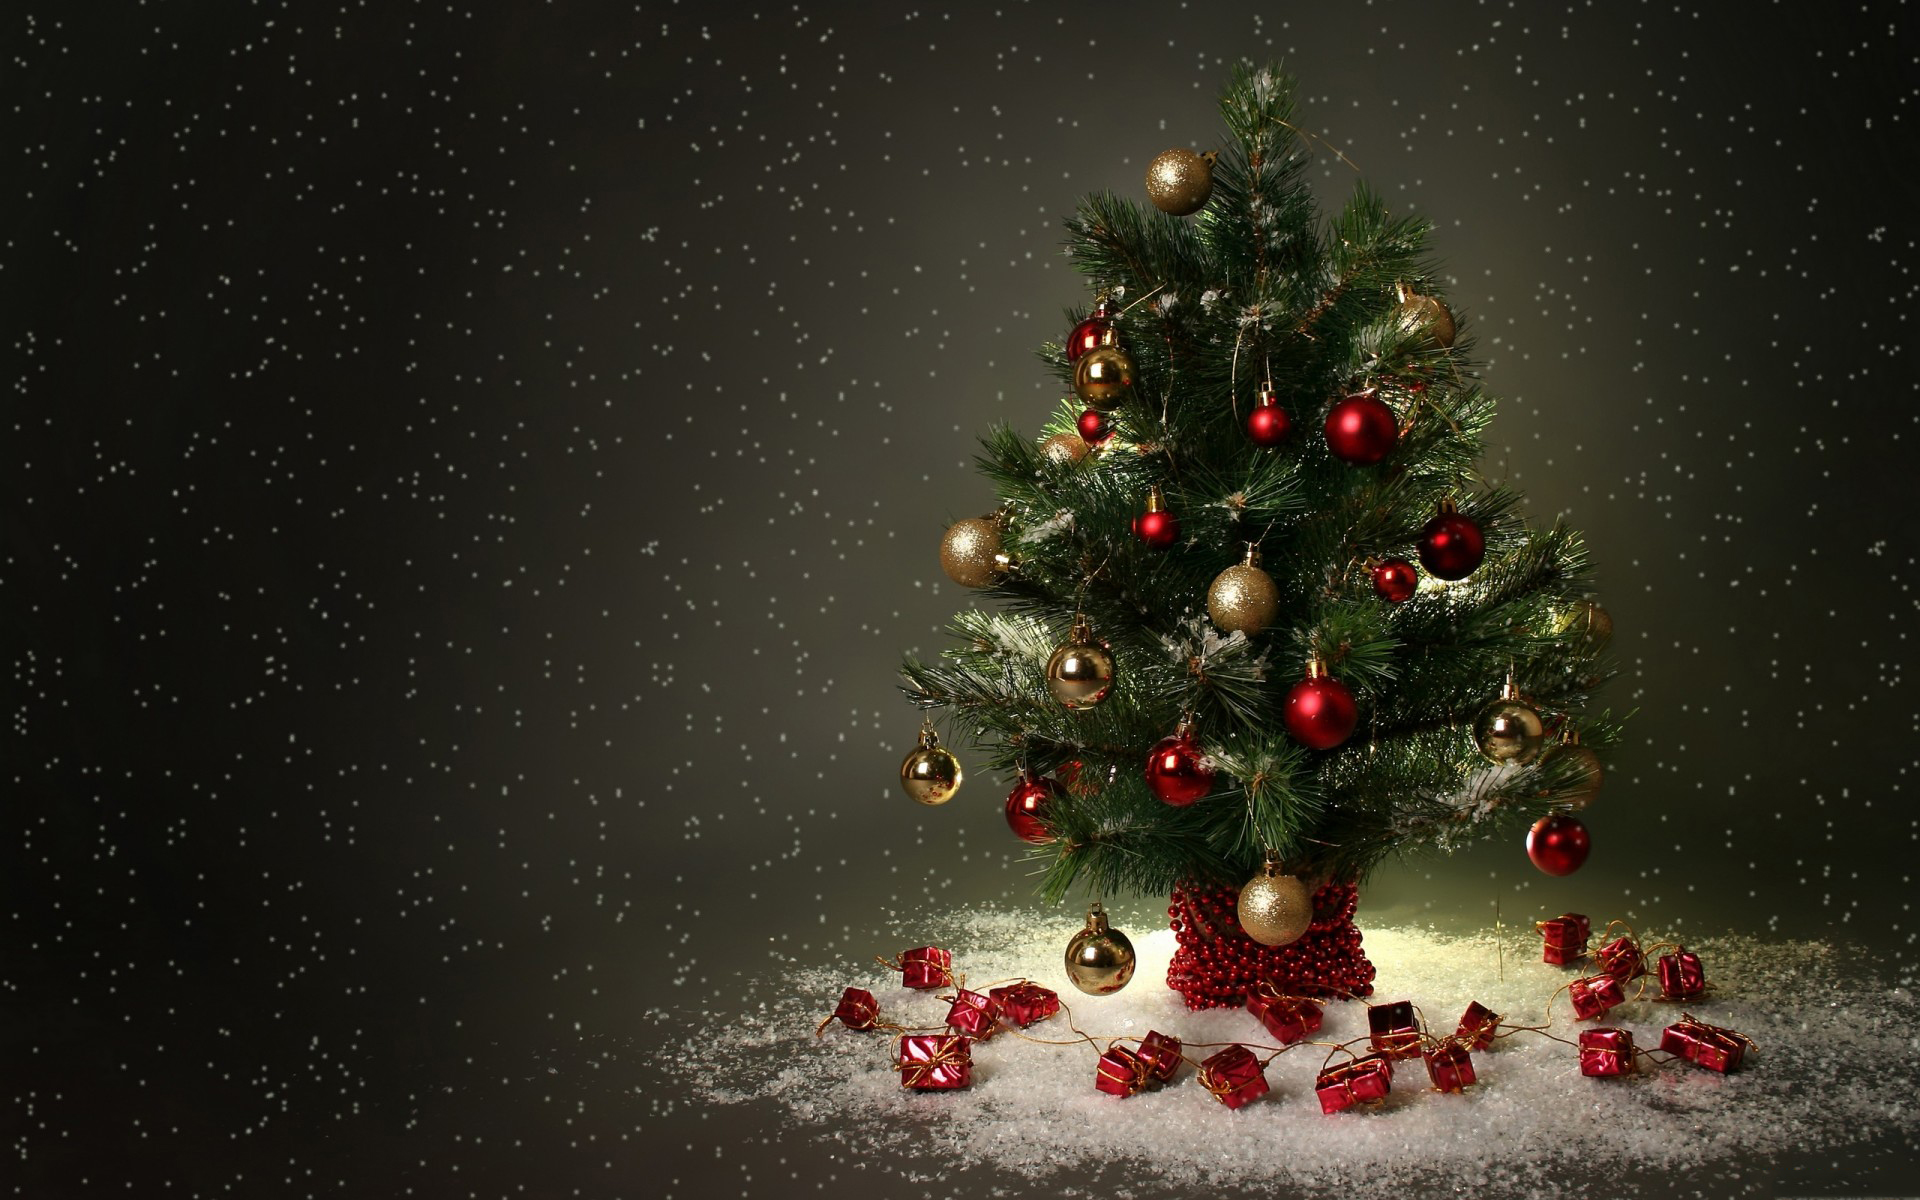 Wallpapers Christmas tree new year on the desktop